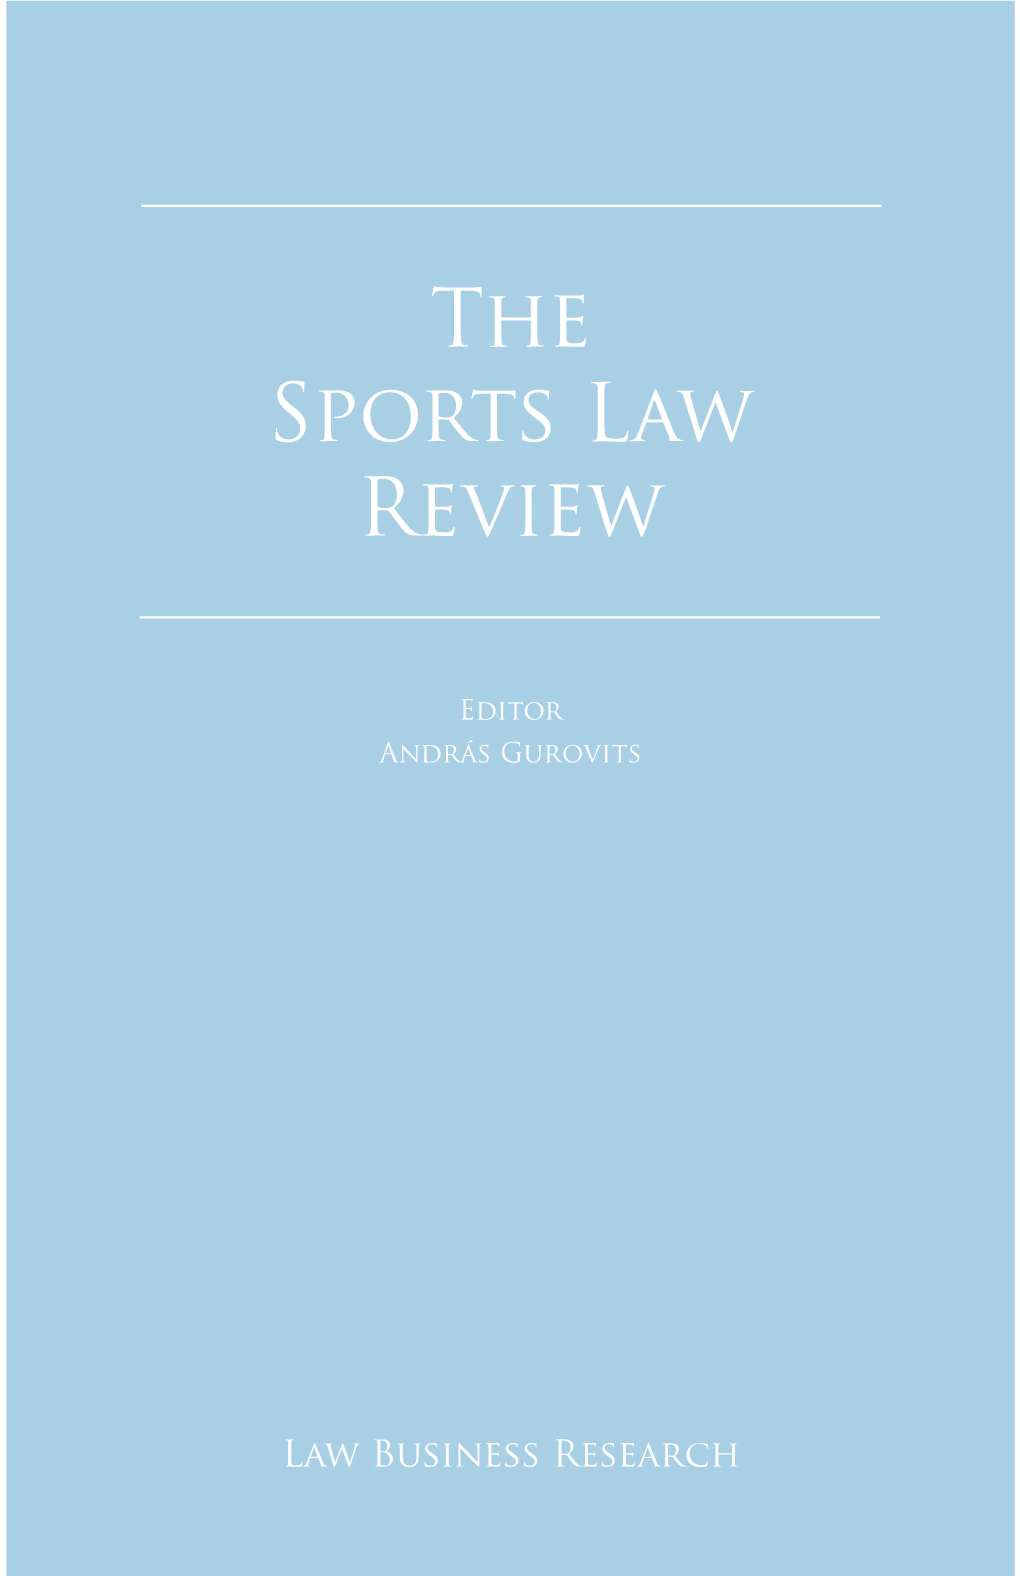 The Sports Law Review